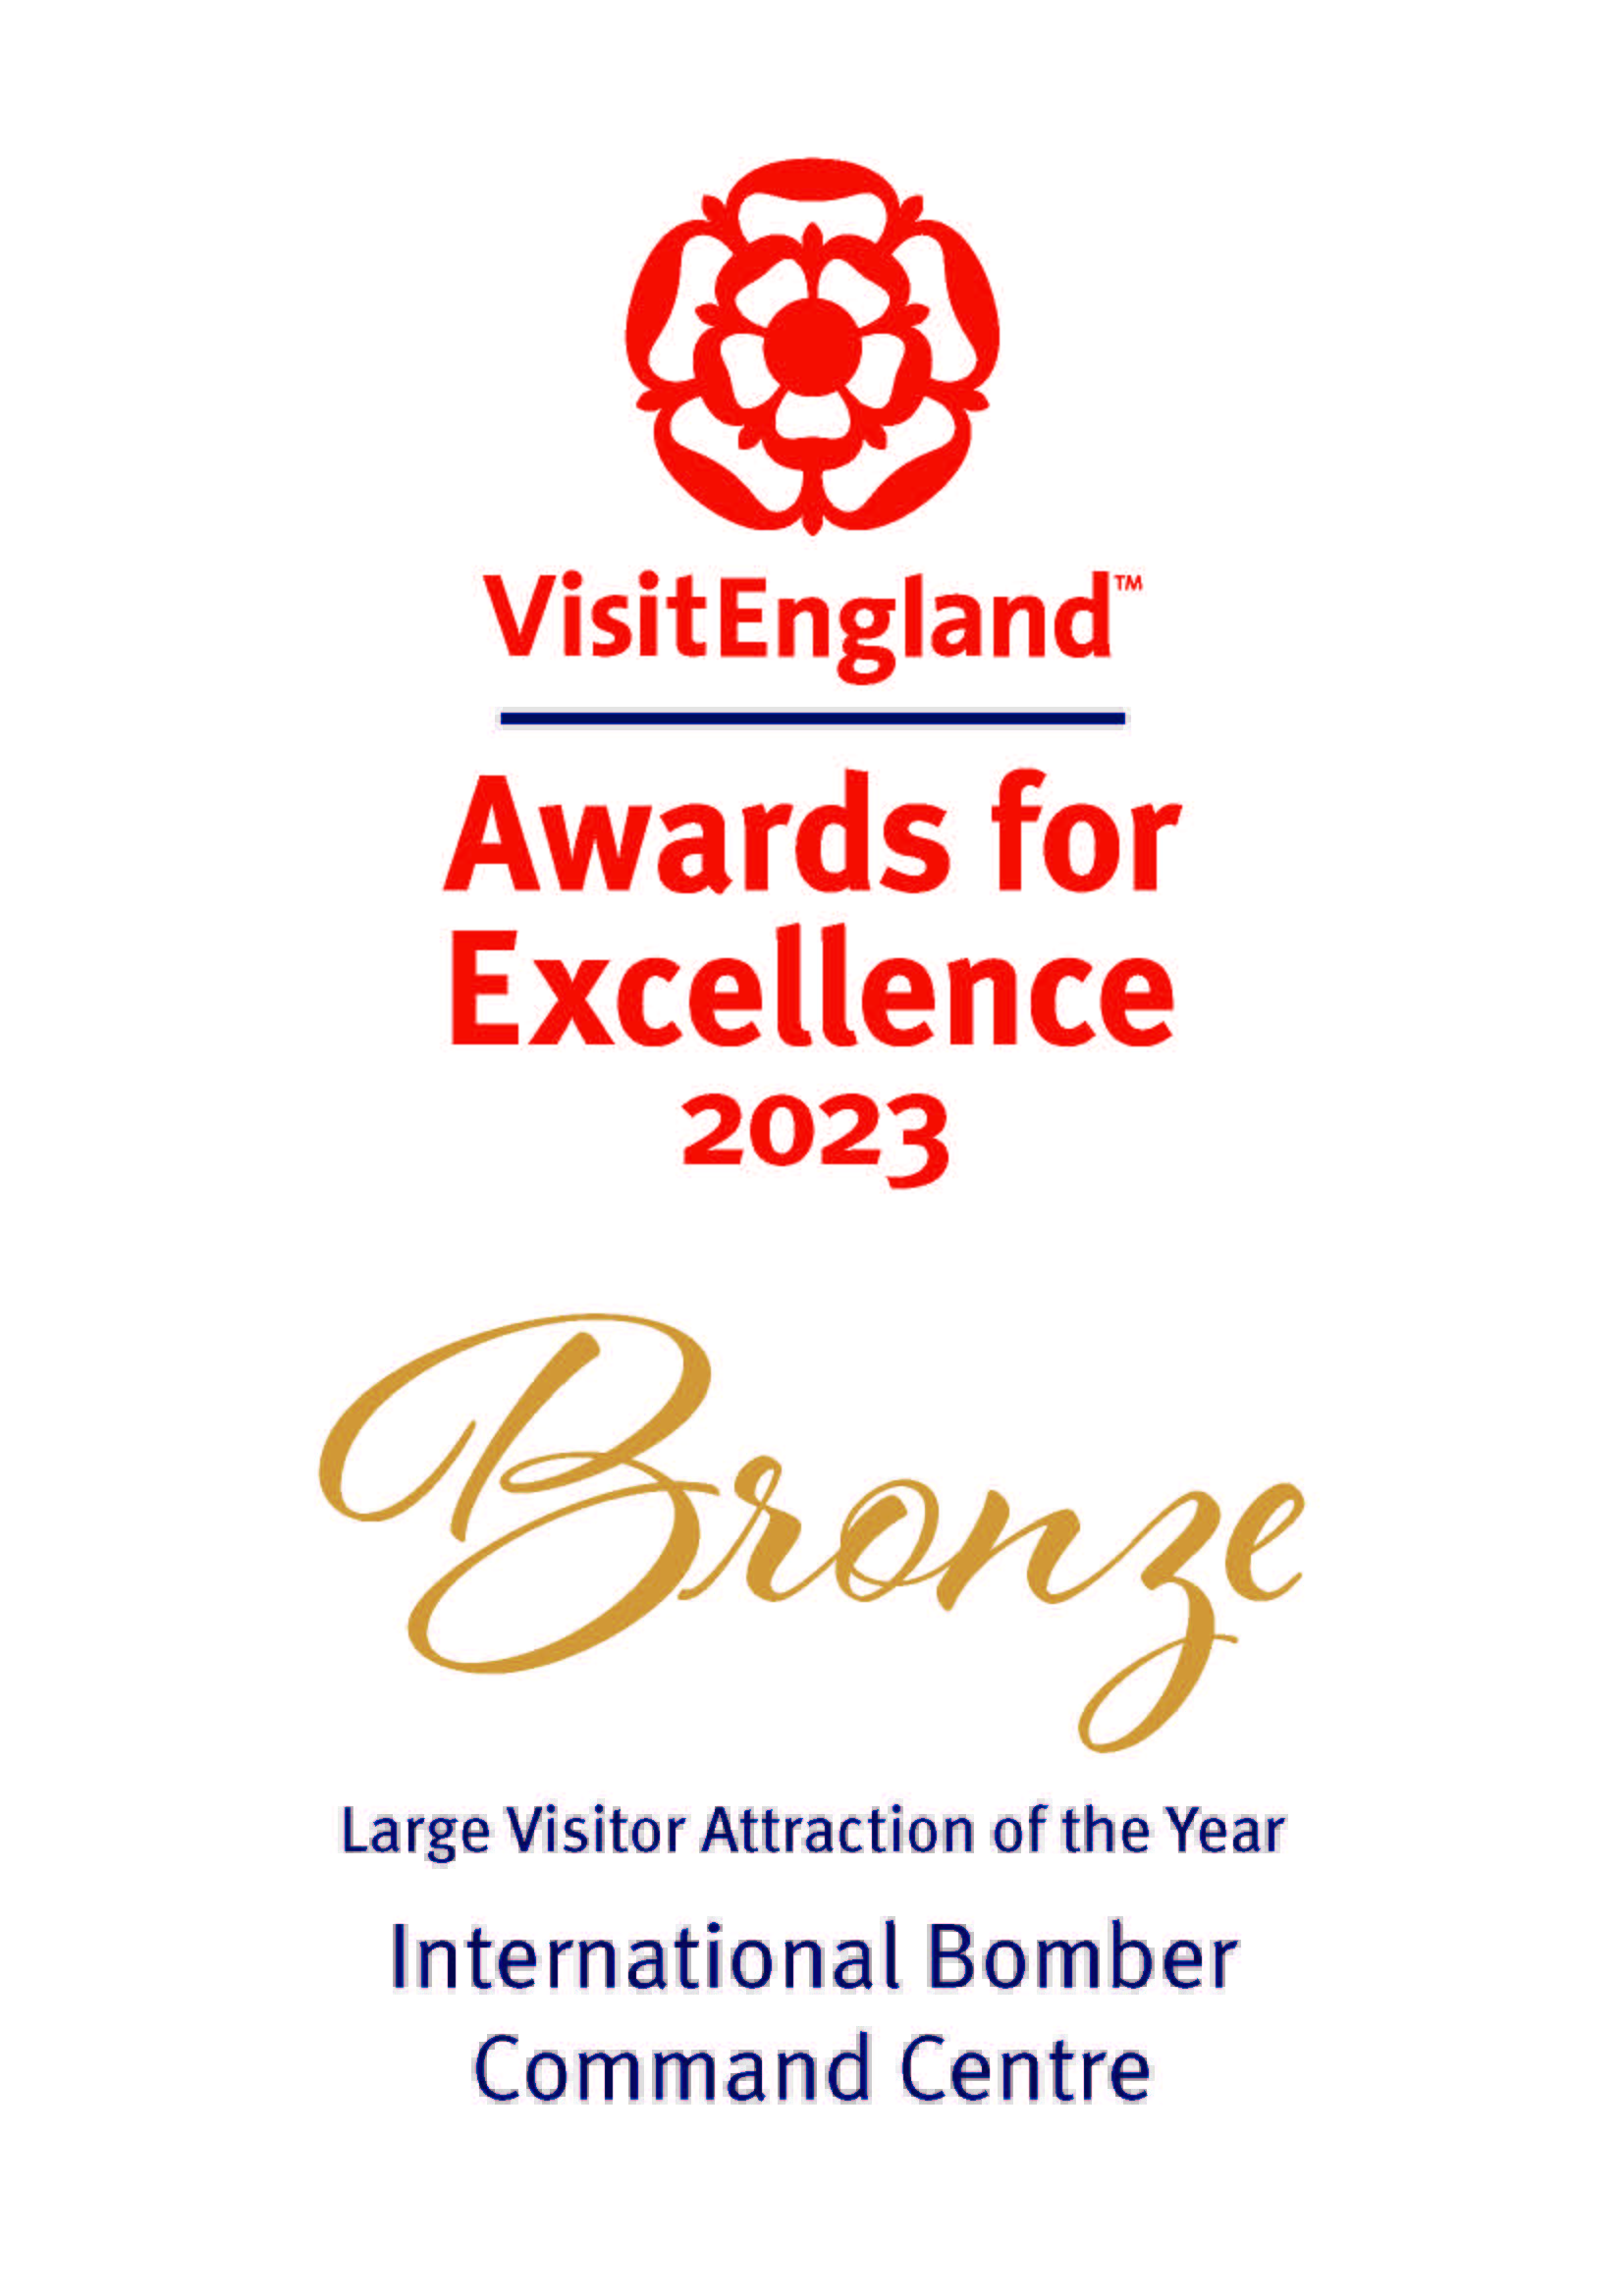 Large Visitor Attraction award